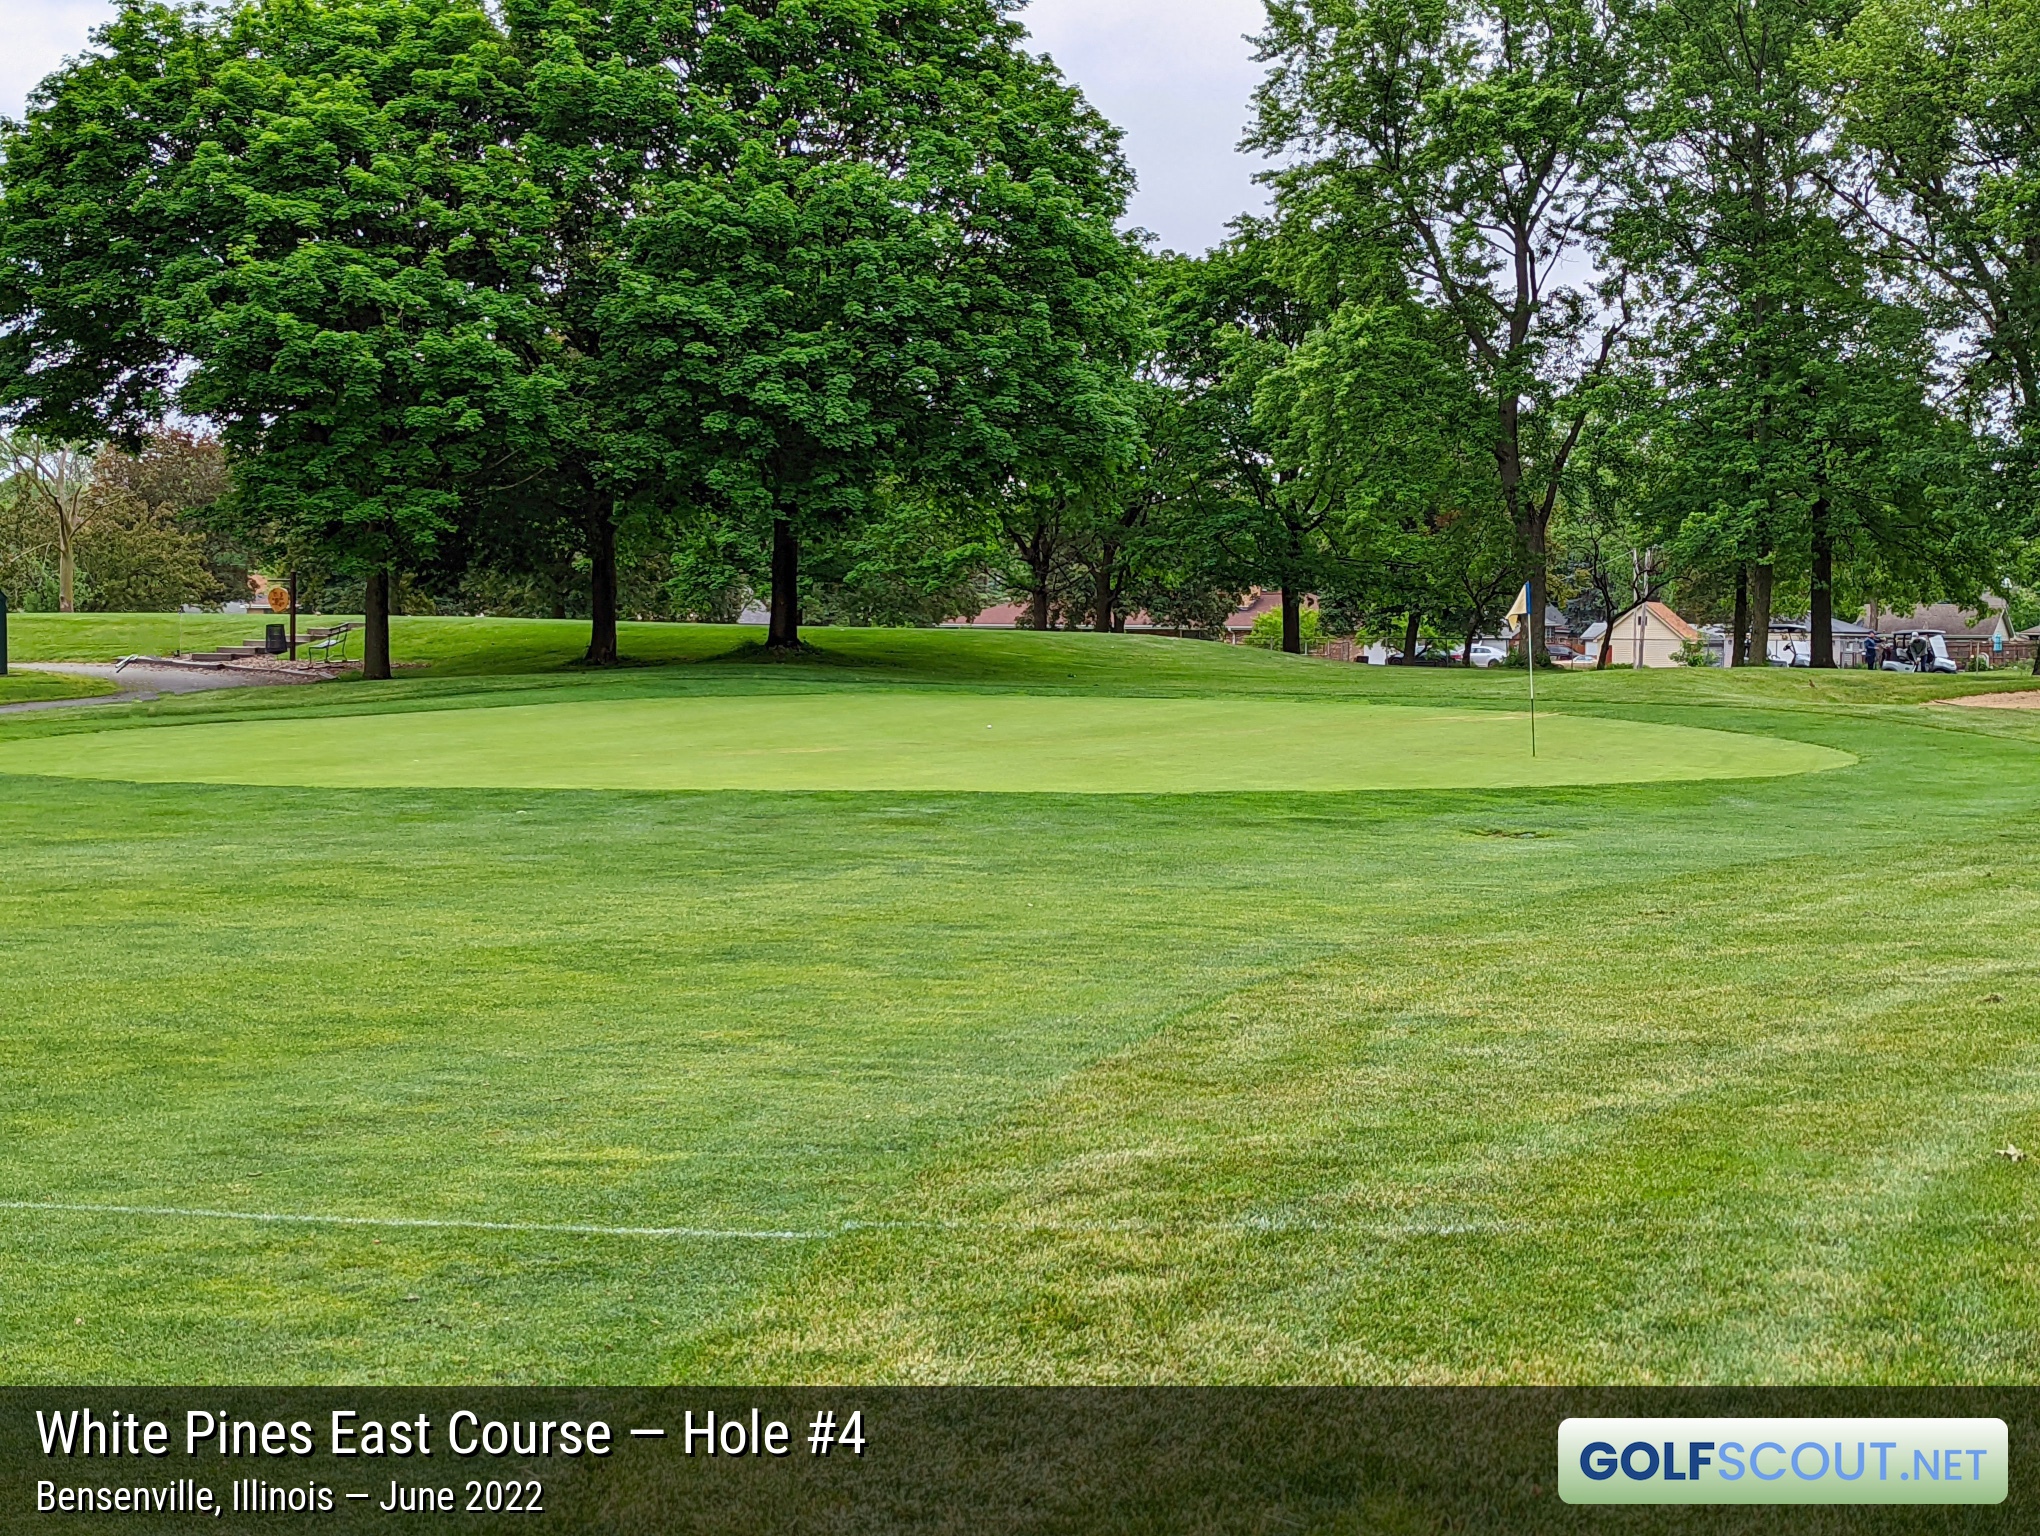 Photo of hole #4 at White Pines East Course in Bensenville, Illinois. 